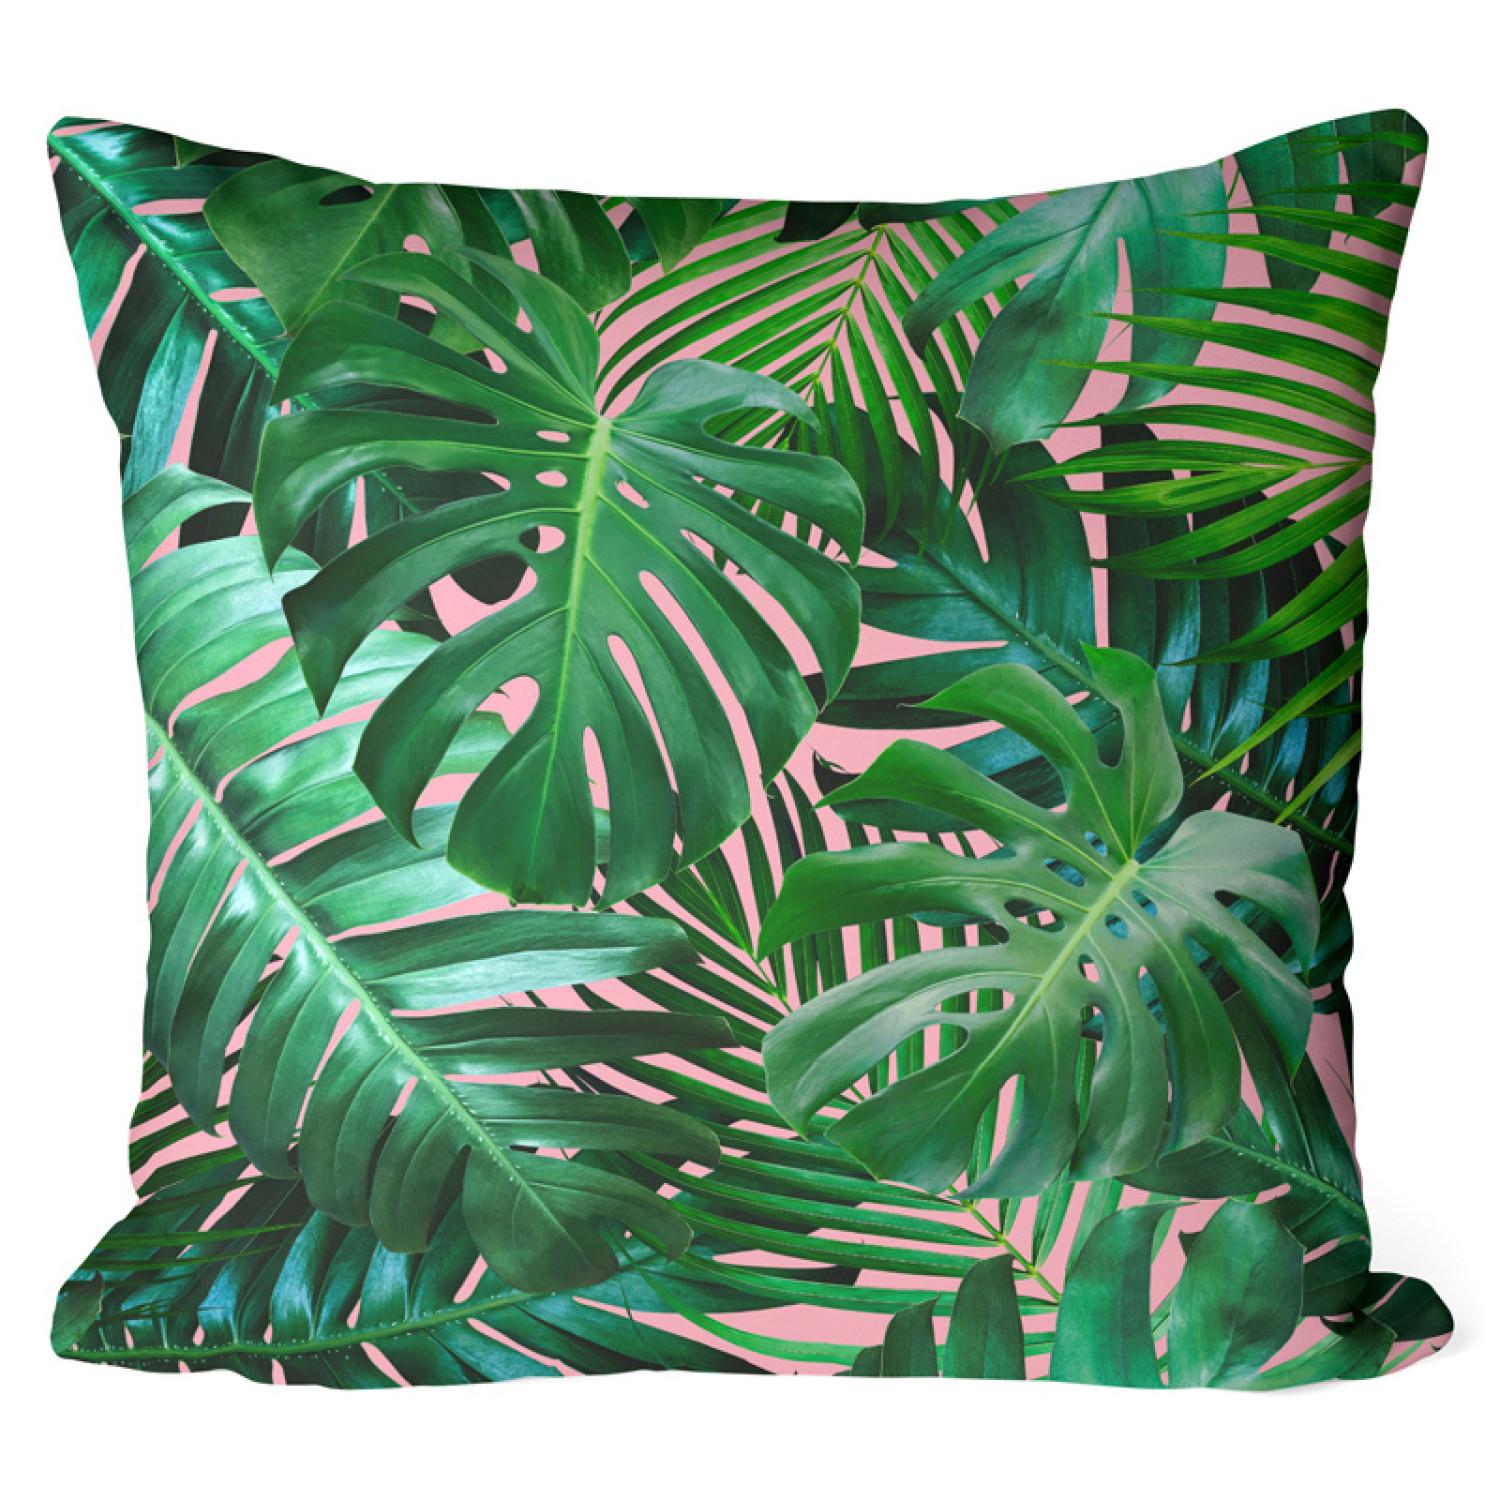 Decorative Microfiber Pillow Botanical lace - a floral composition in greens and pinks cushions